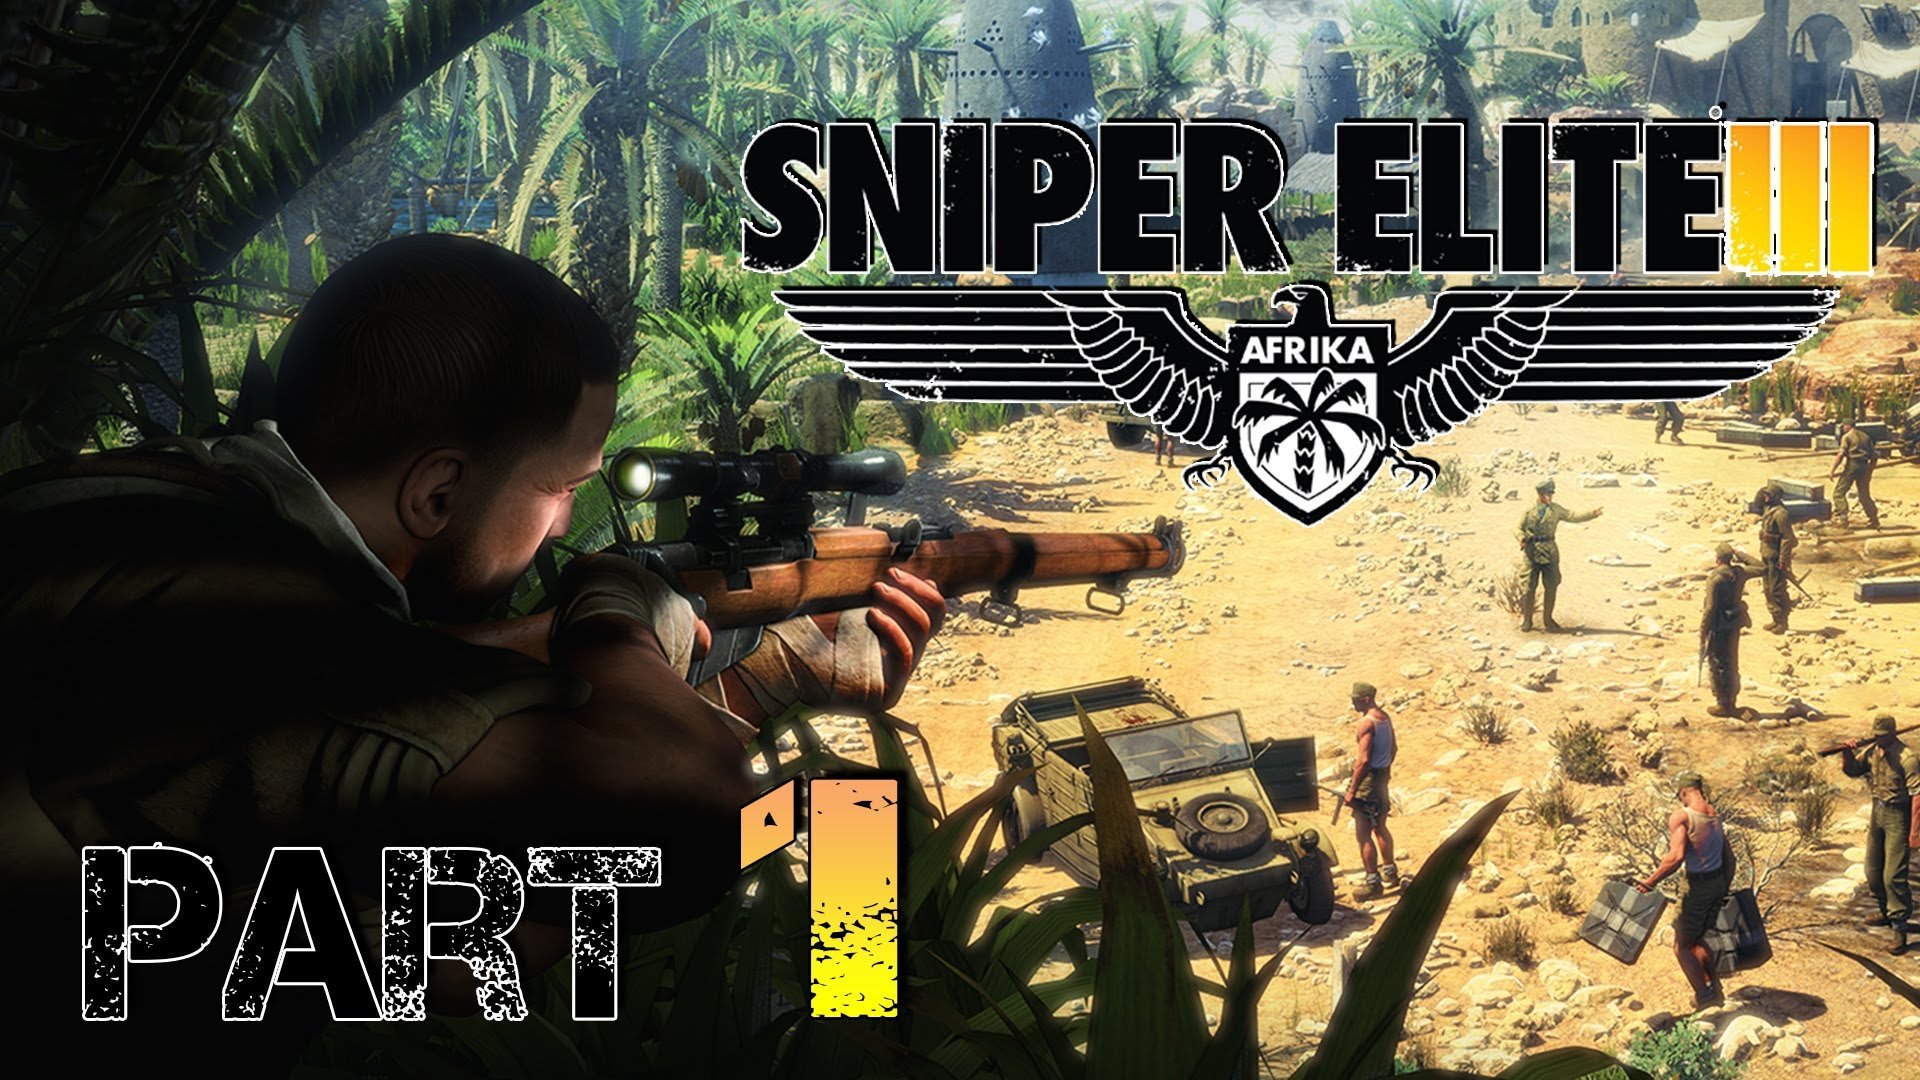 SNIPER ELITE III shooter military weapon gun tactical stealth 43